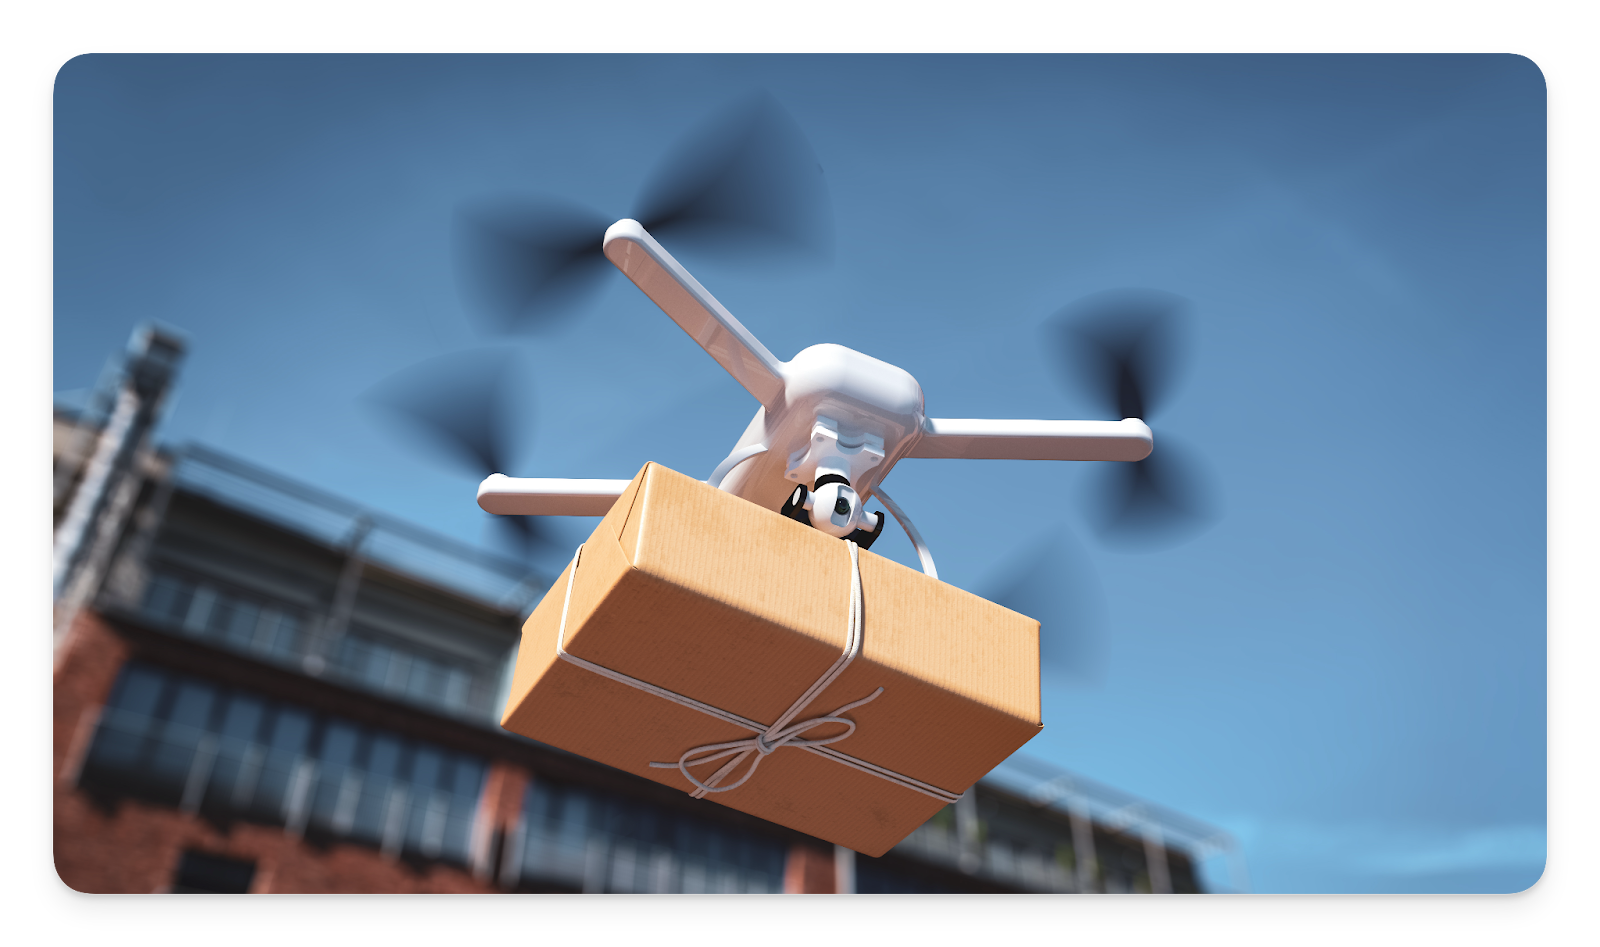 A drone delivering a package.